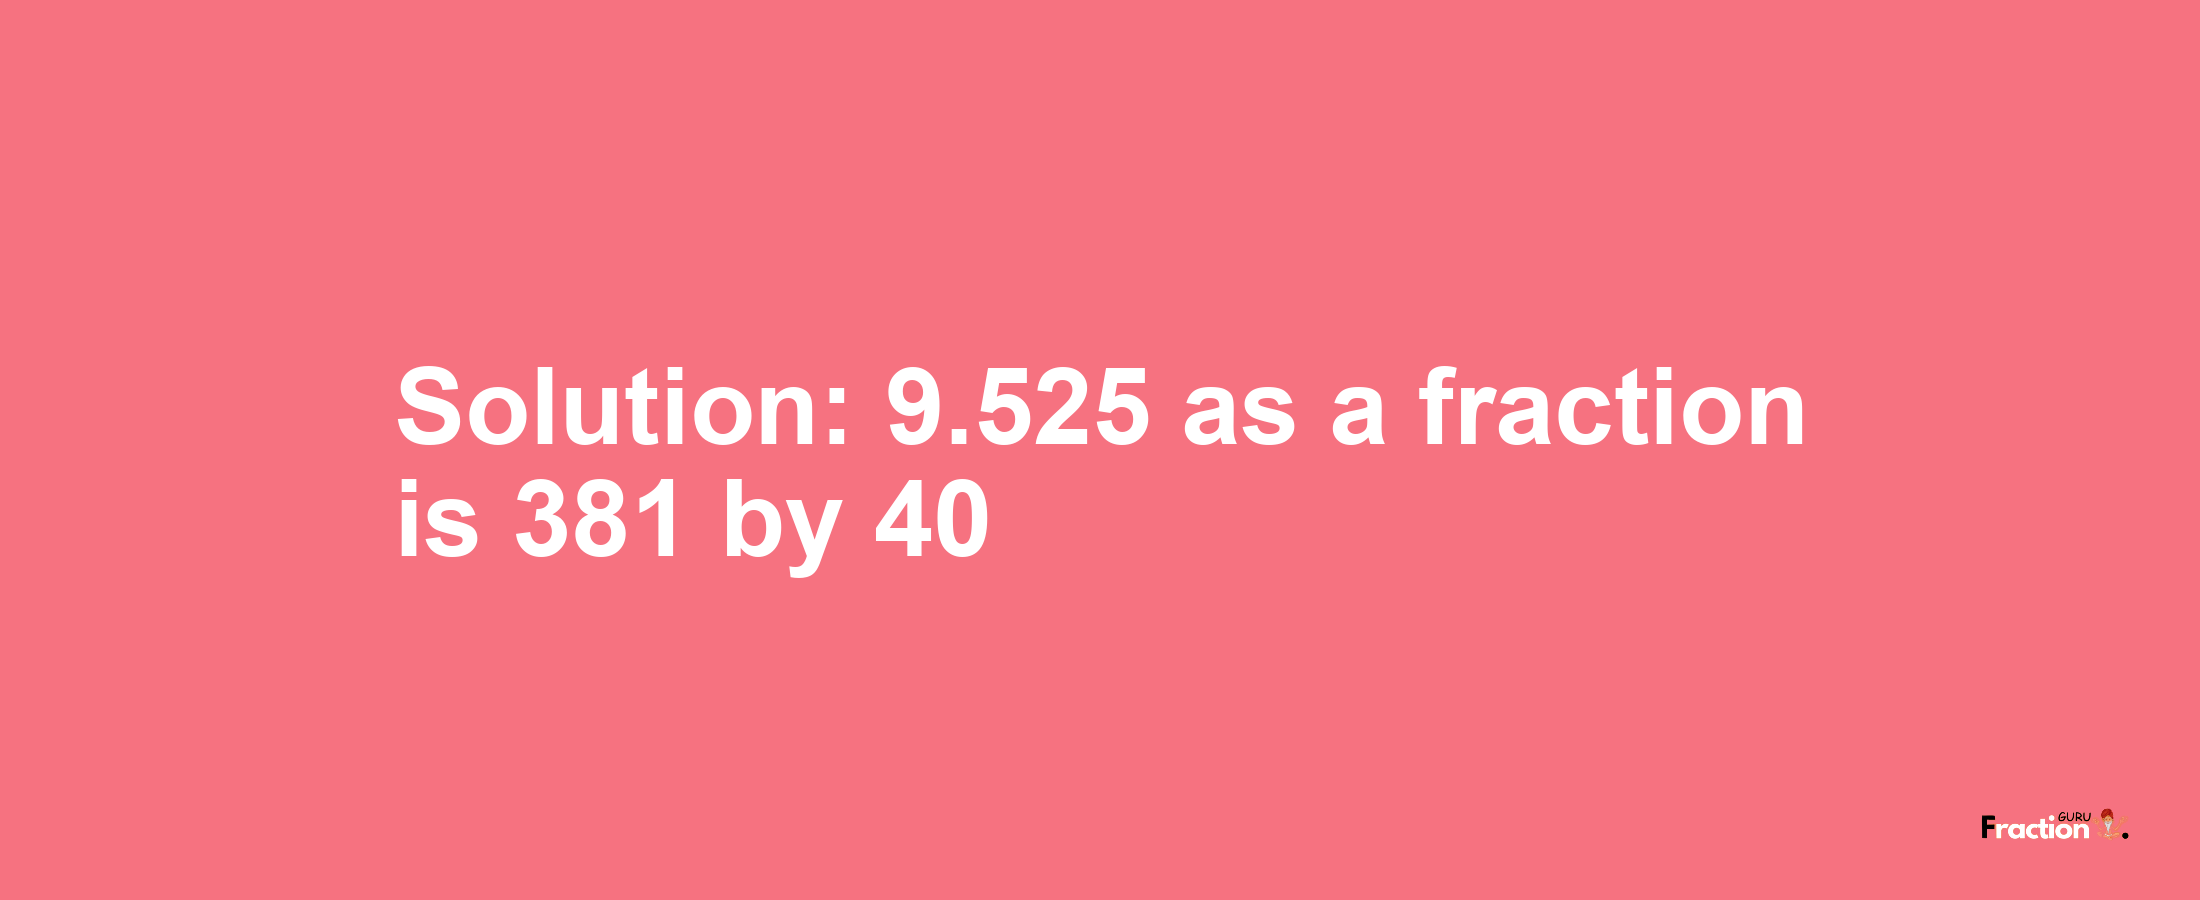 Solution:9.525 as a fraction is 381/40